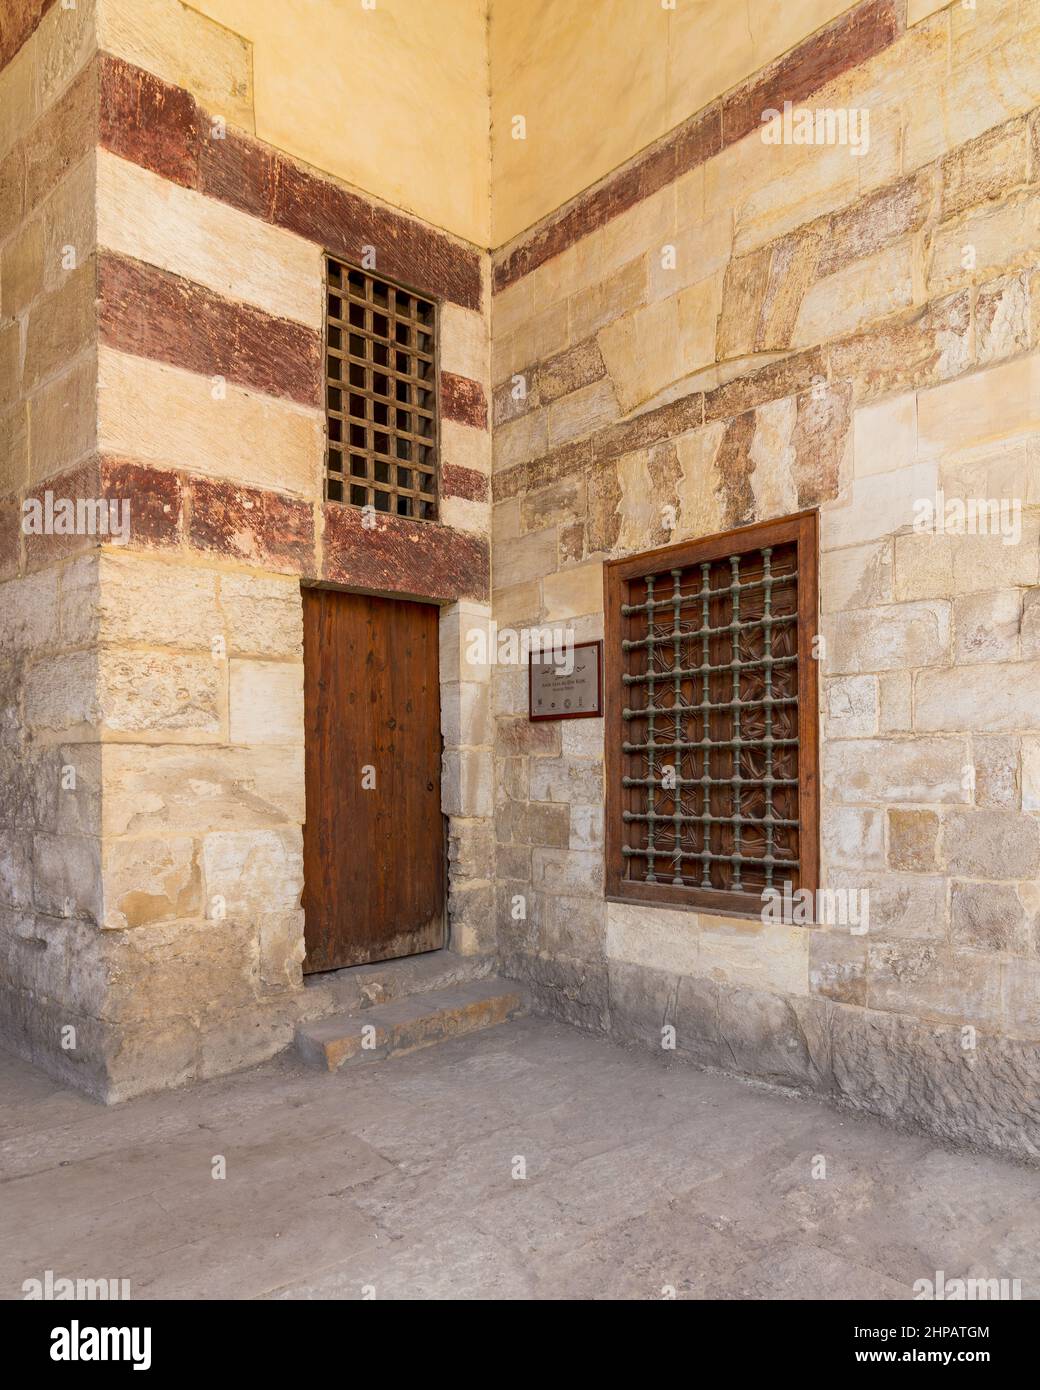 Mamluk era Prince AlaaAl Din Kojk Burial Chamber, attached to the Mosque of Aqsunqur, aka Blue Mosque, Bab El Wazir district, Old Cairo, Egypt Stock Photo